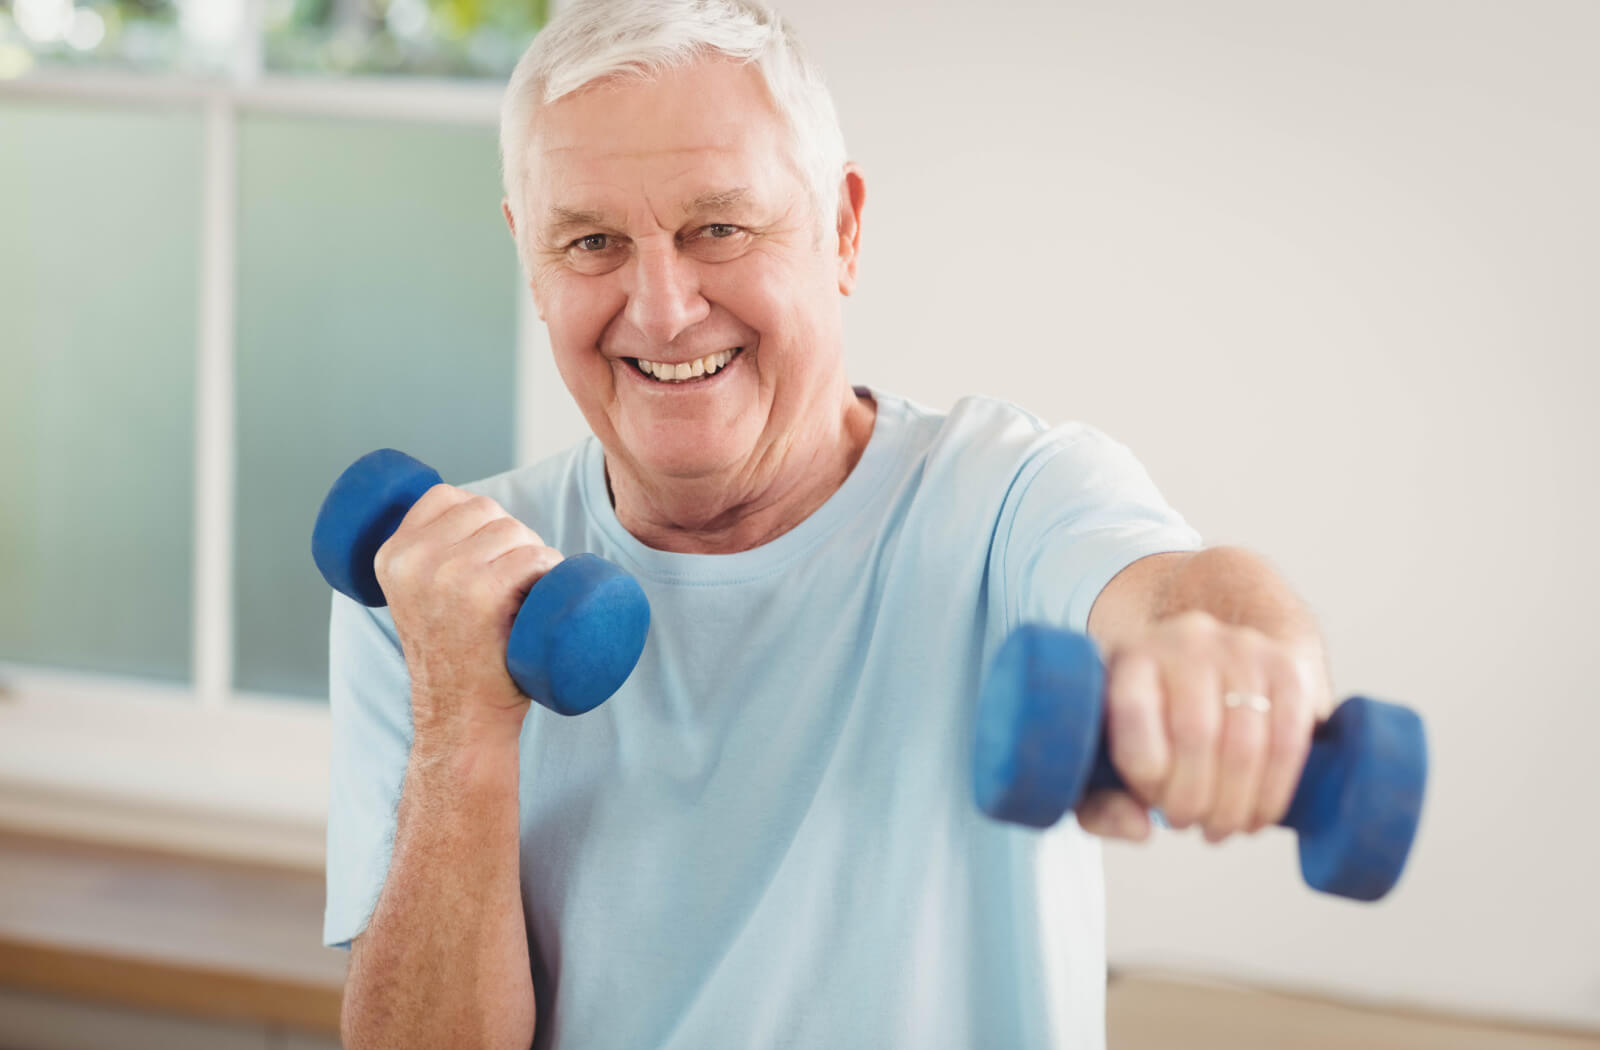 A senior man smiling with white hair wearing fitness clothes and exercising with dumbbells.